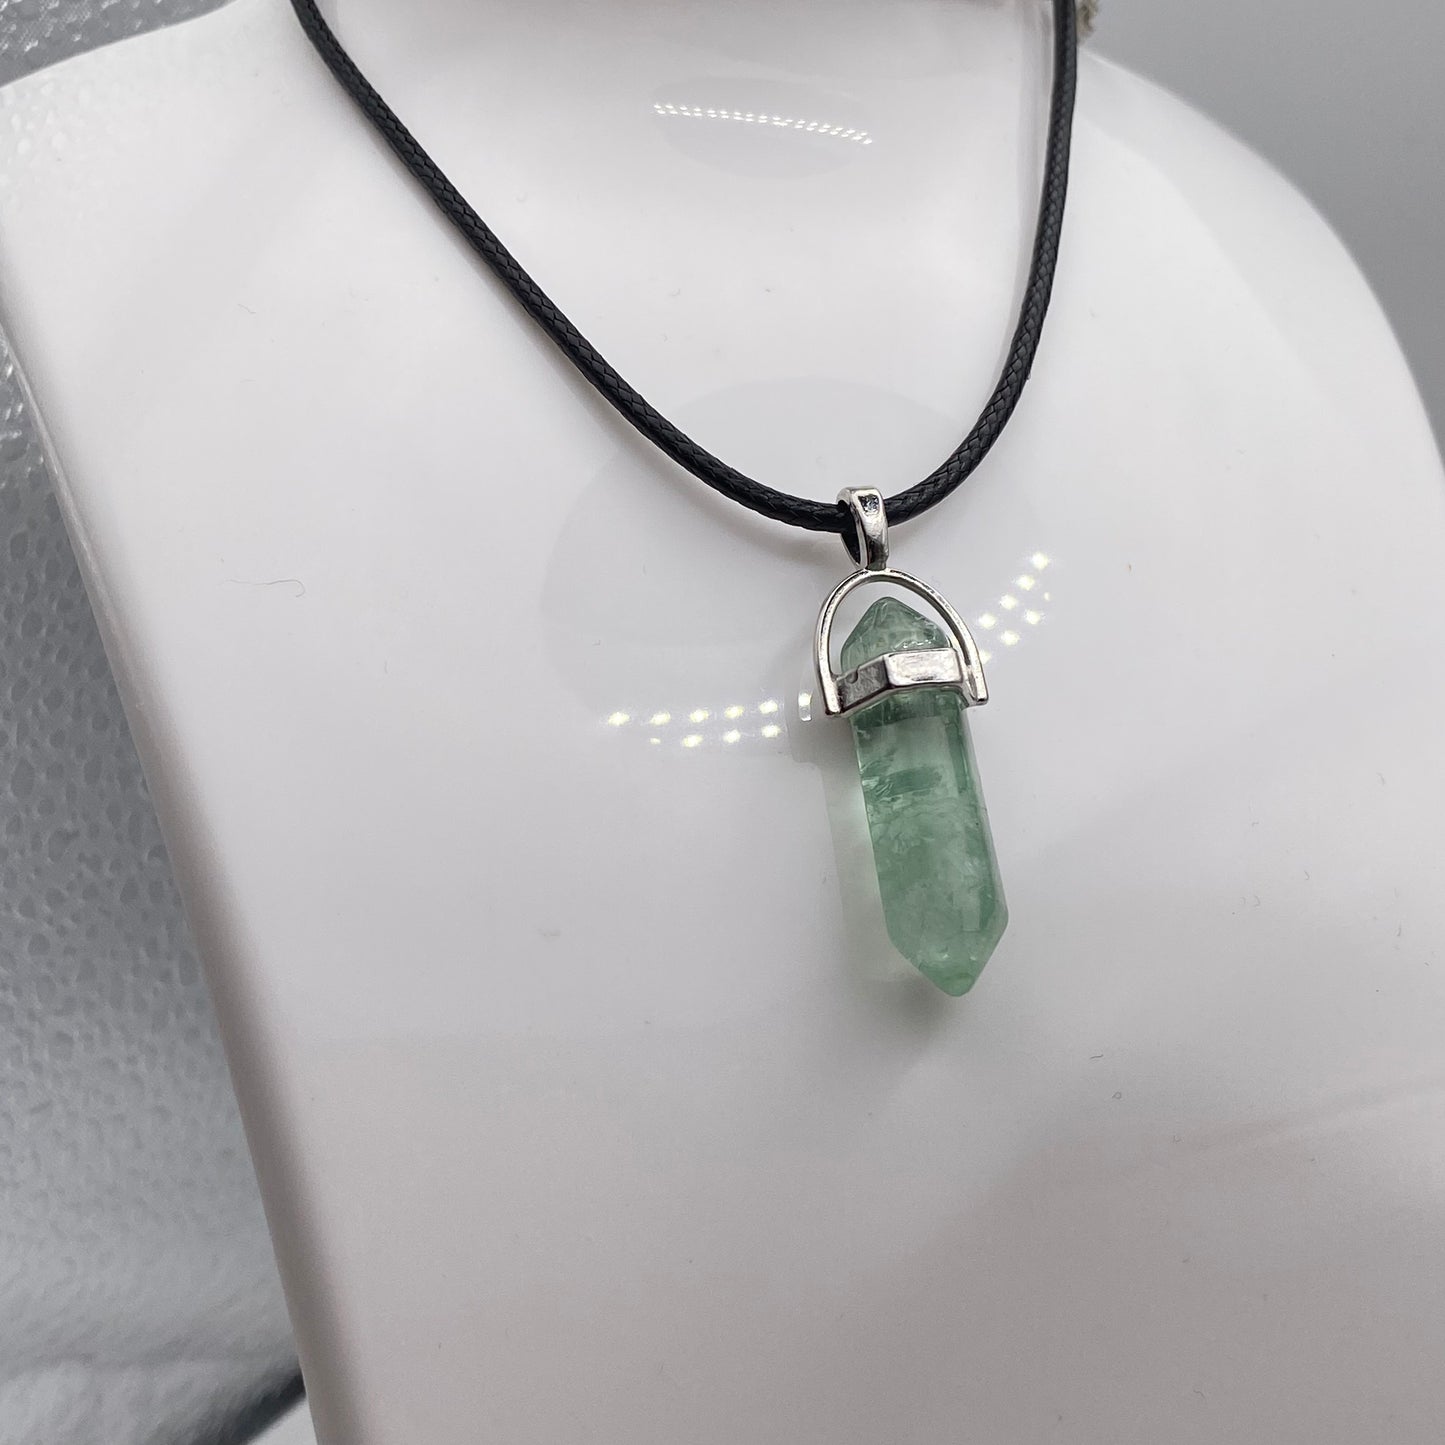 Green Fluorite Crystal Pendant Necklace on Black Cord